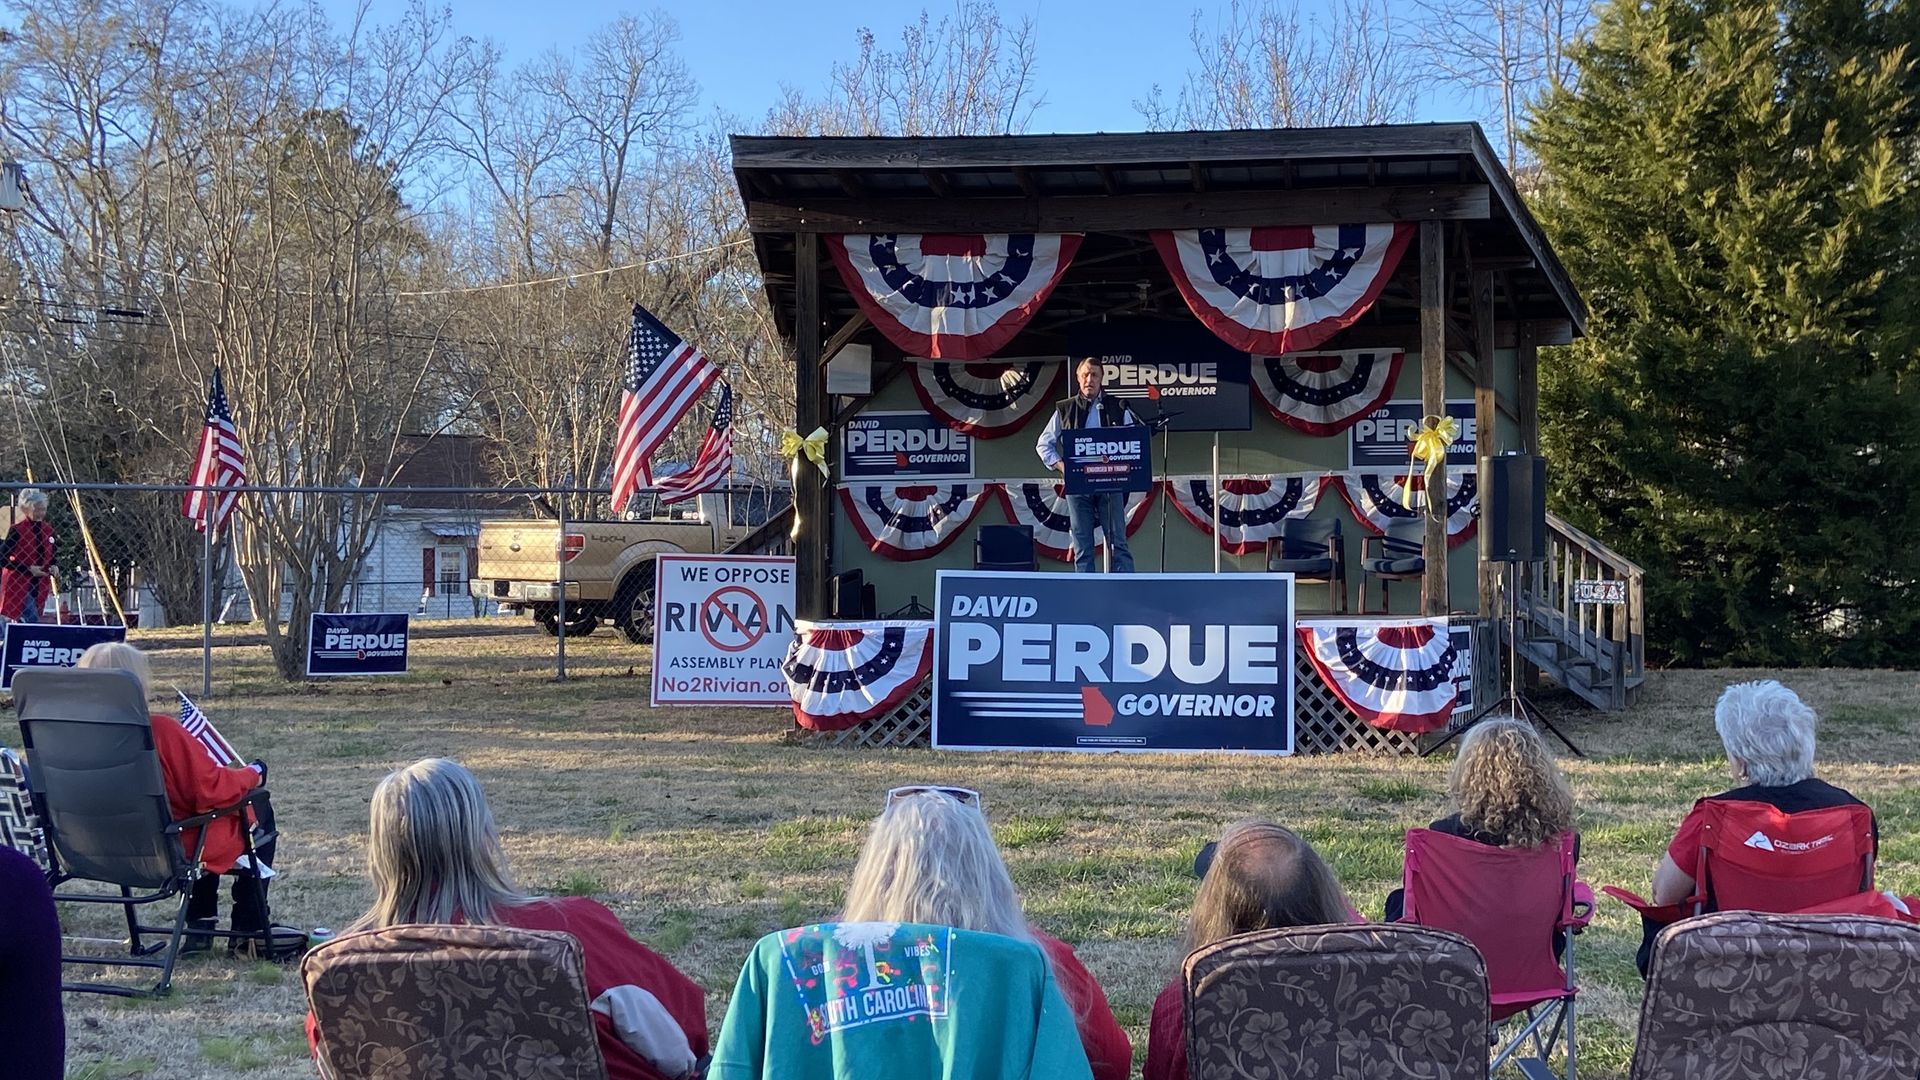 Perdue speaking on a stage to people in lawn chairs